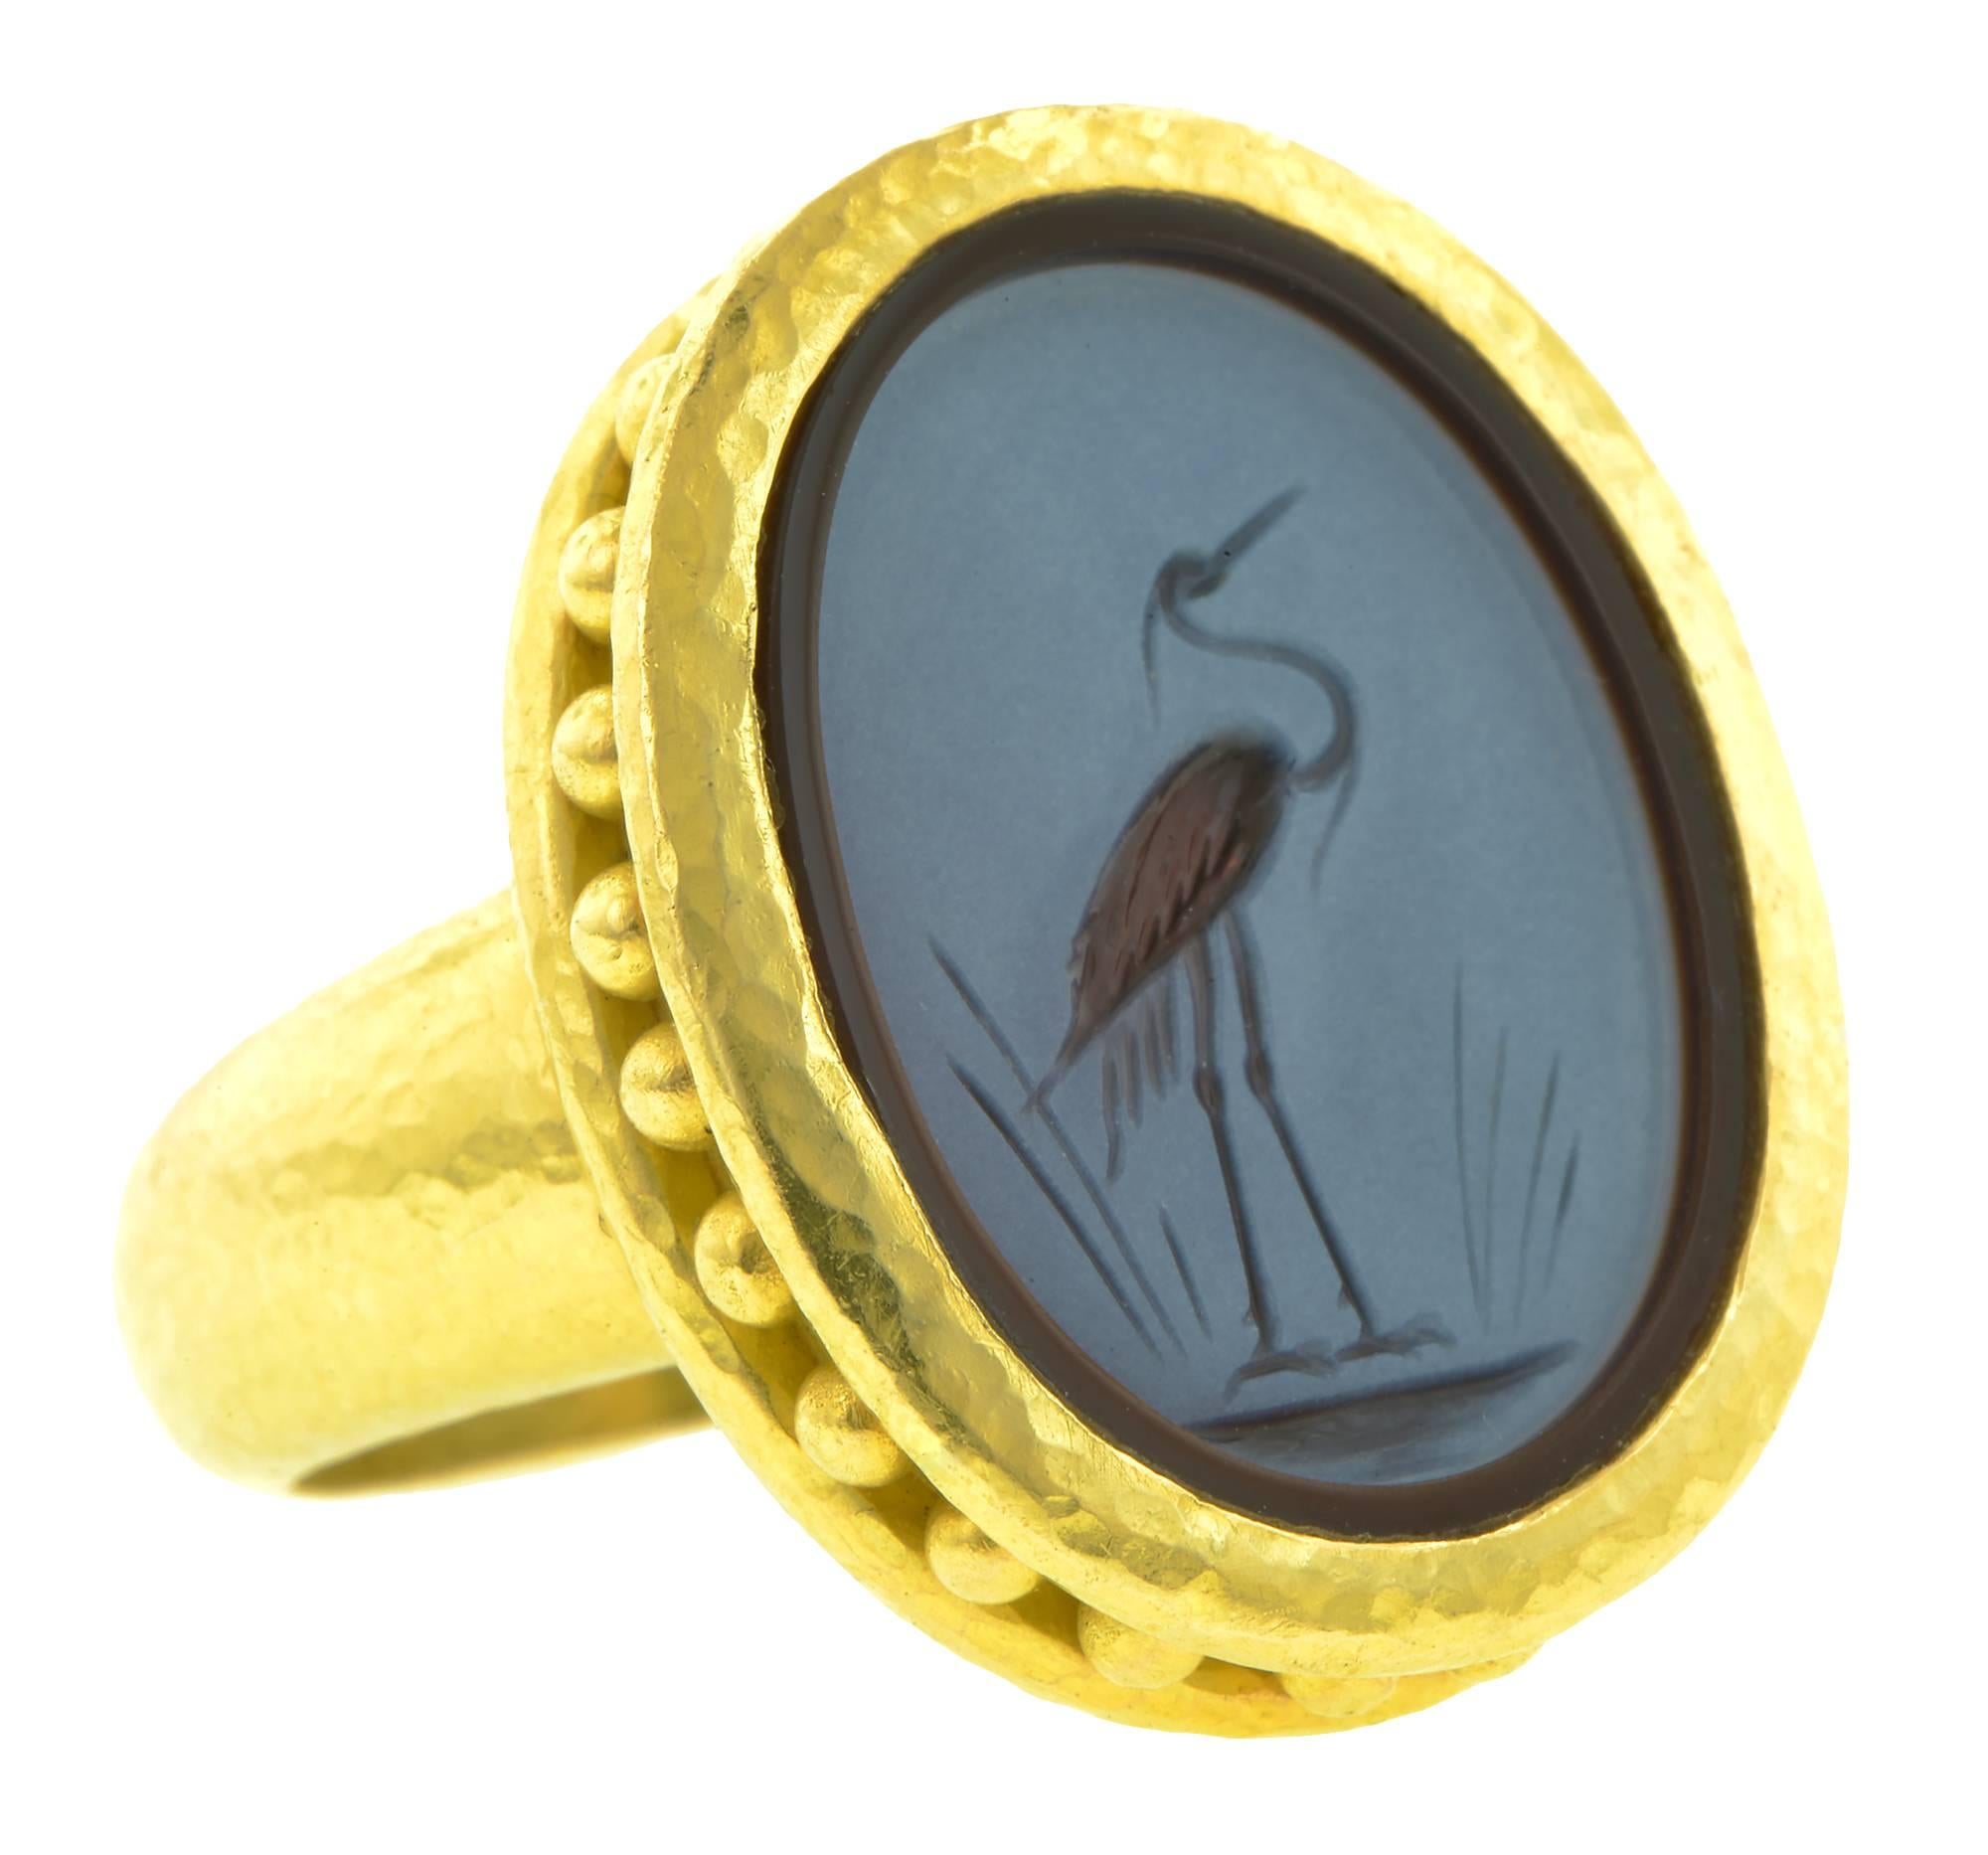 Estate Elizabeth Locke intaglio ring centering a collet set oval Venetian Glass intaglio measuring 20 x 15 x 4.8mm; featuring a carved Heron in wetlands theme. Etruscan motif, with granulation accents and hammered finish. Fashioned in 19k yellow